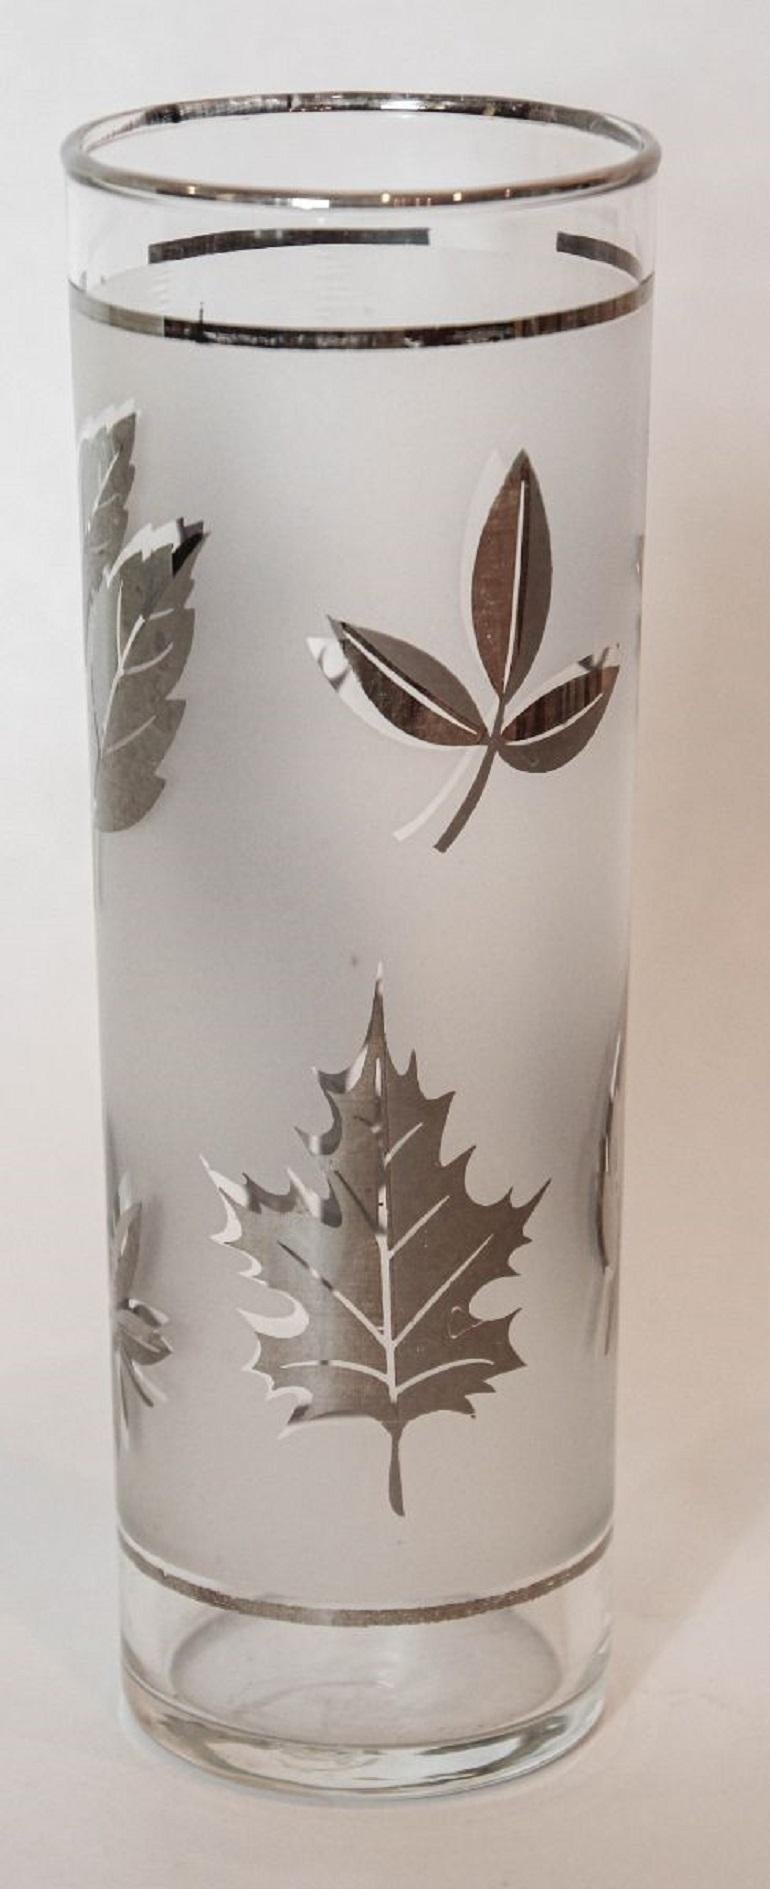 1950s Silver Foliage Highball Cocktail Glasses by Libbey Glass Co Set of 8 For Sale 1